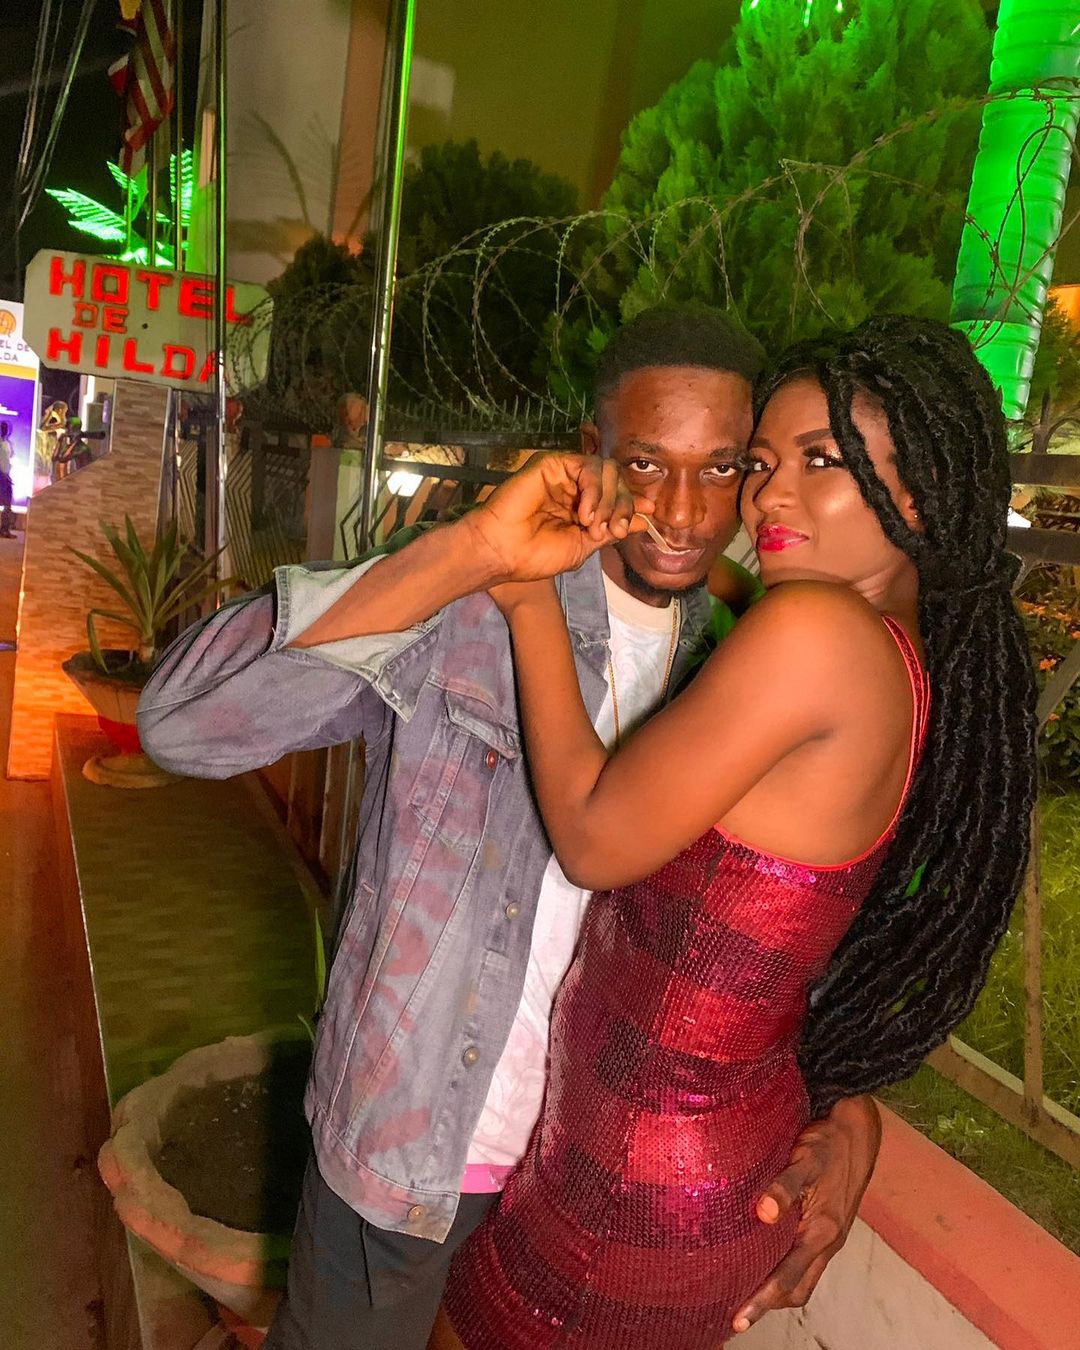 Upcoming musician Nana Essel takes 10,000ghc from His Girlfriend for a Music Video only to use His Side Chick in the Video - Details 3